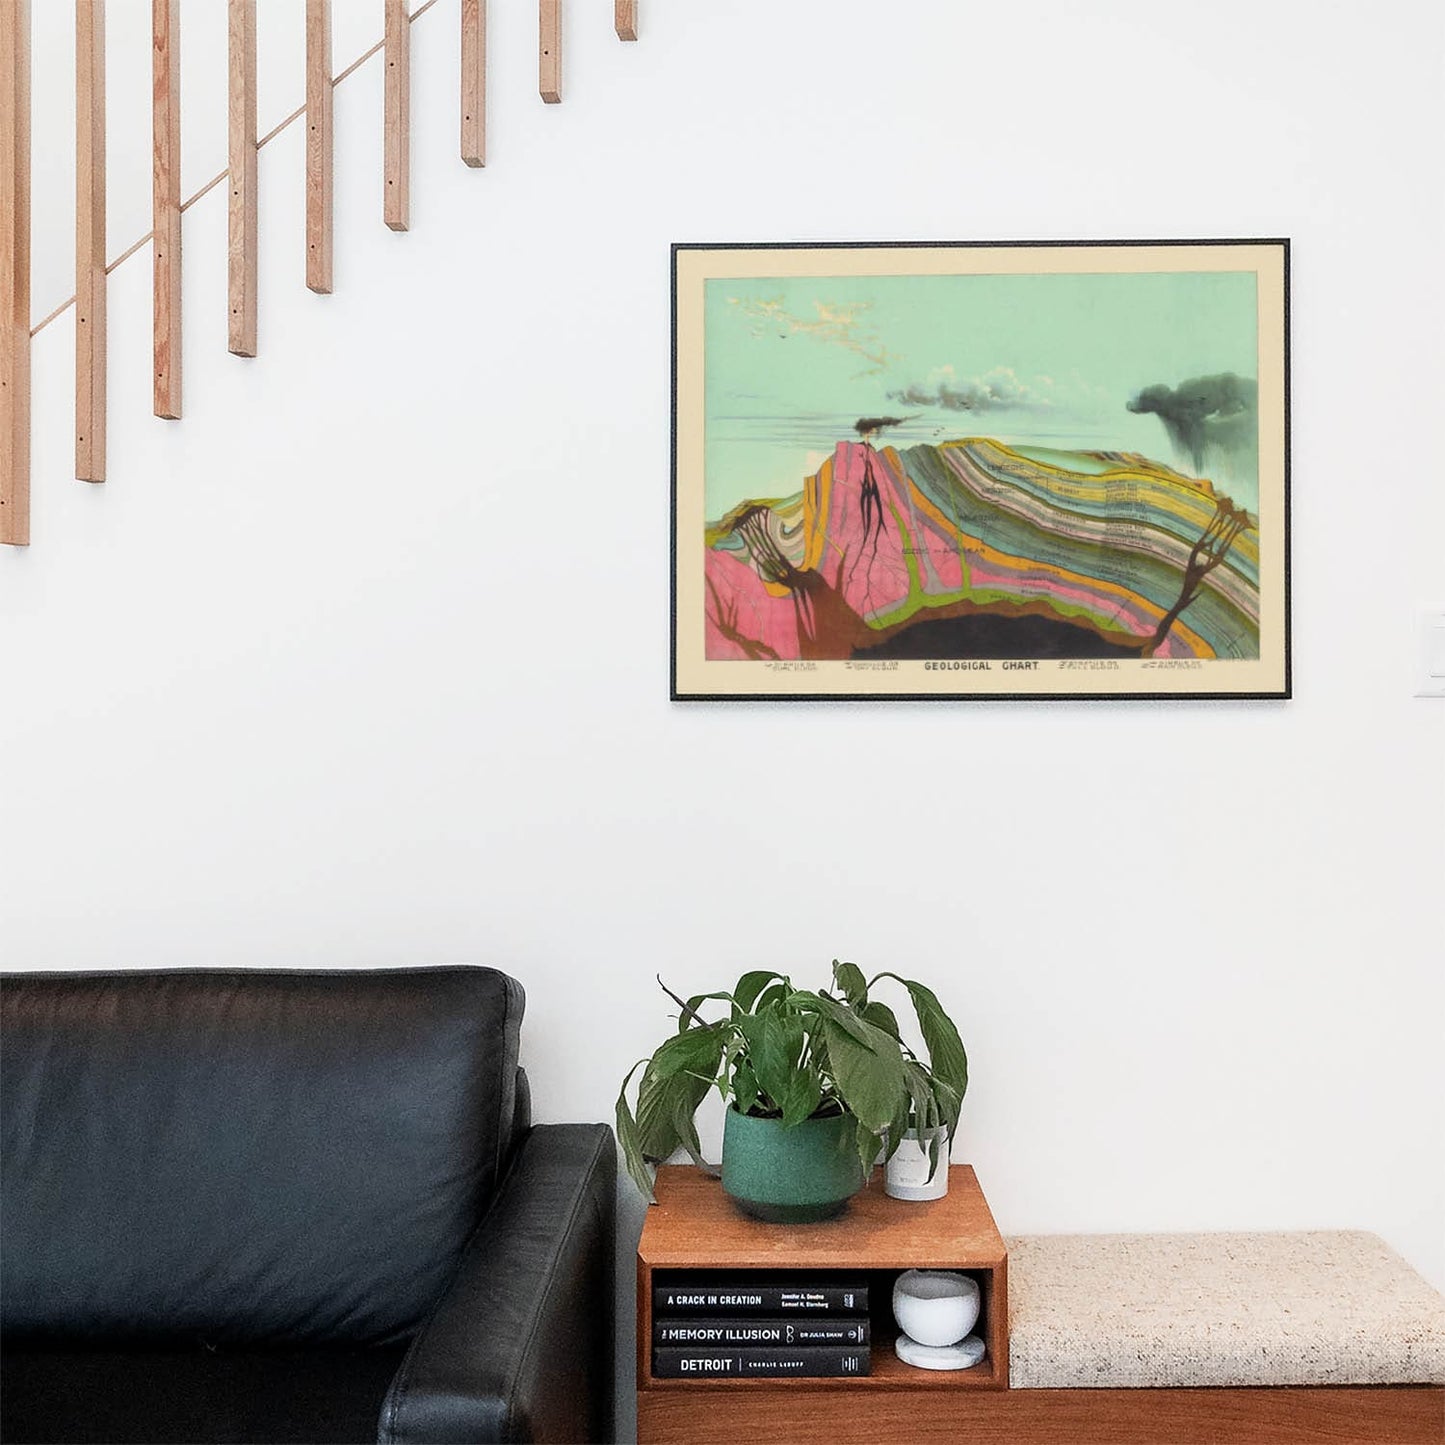 Layers of the Earth Wall Art Print in a Picture Frame on Living Room Wall